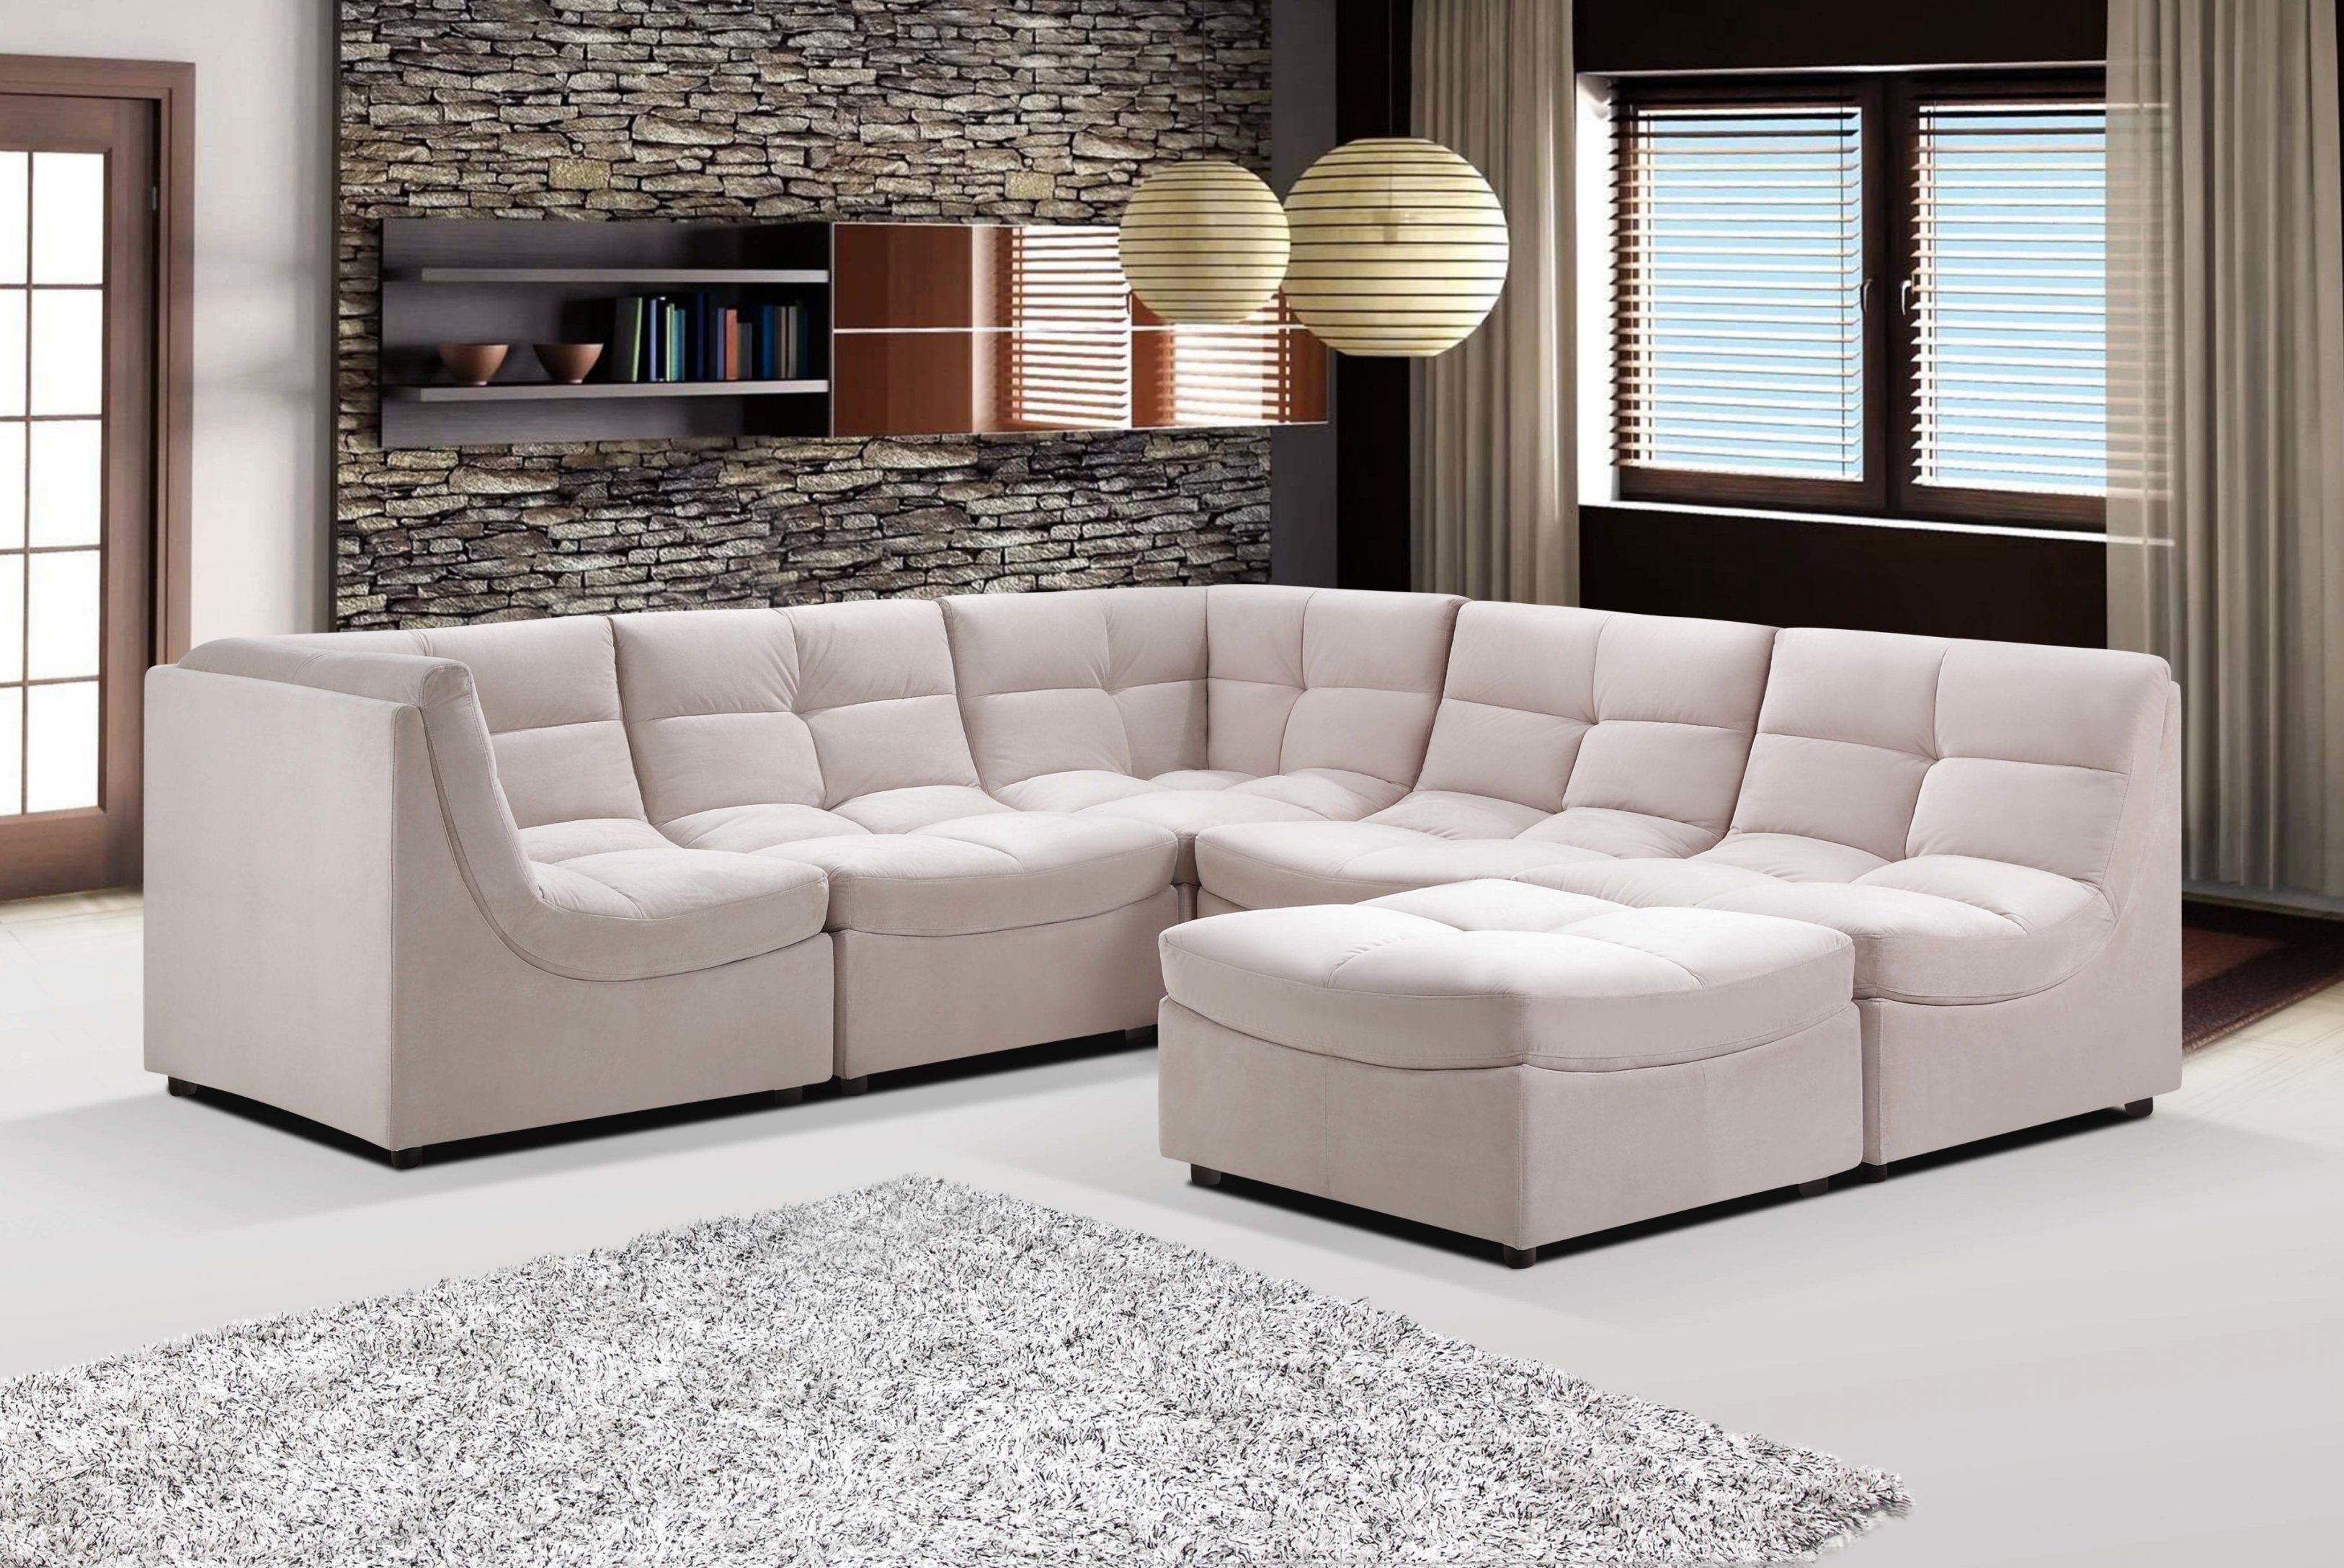 Small Modular Sectional Sofa 21 For Your Sofa Sectionals For Cloud For Small Modular Sectional Sofas (View 7 of 10)